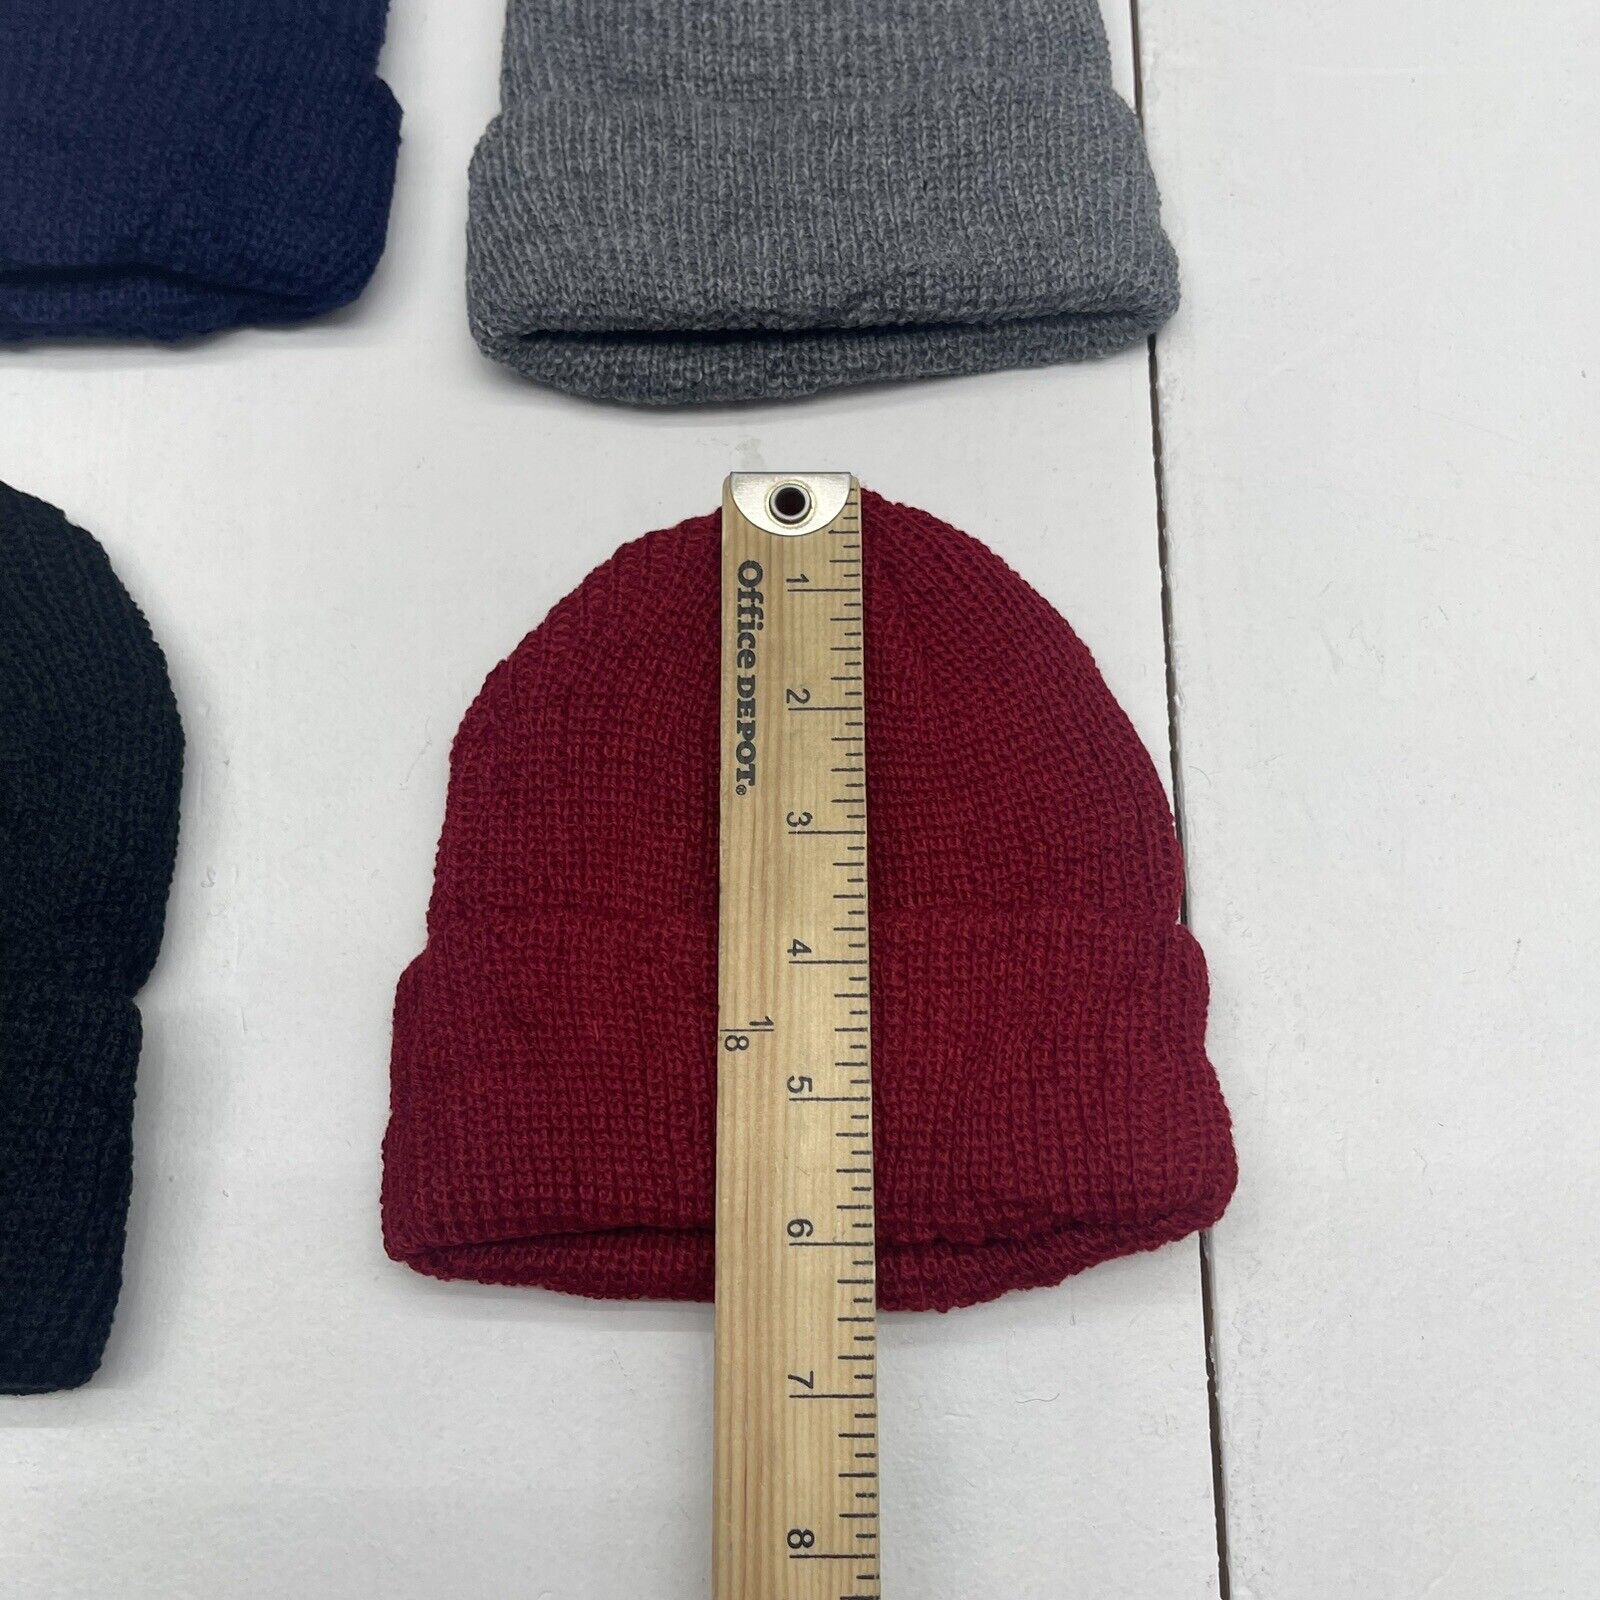 Satinior 4 Pack Multicolor Kids Beanies New - beyond exchange